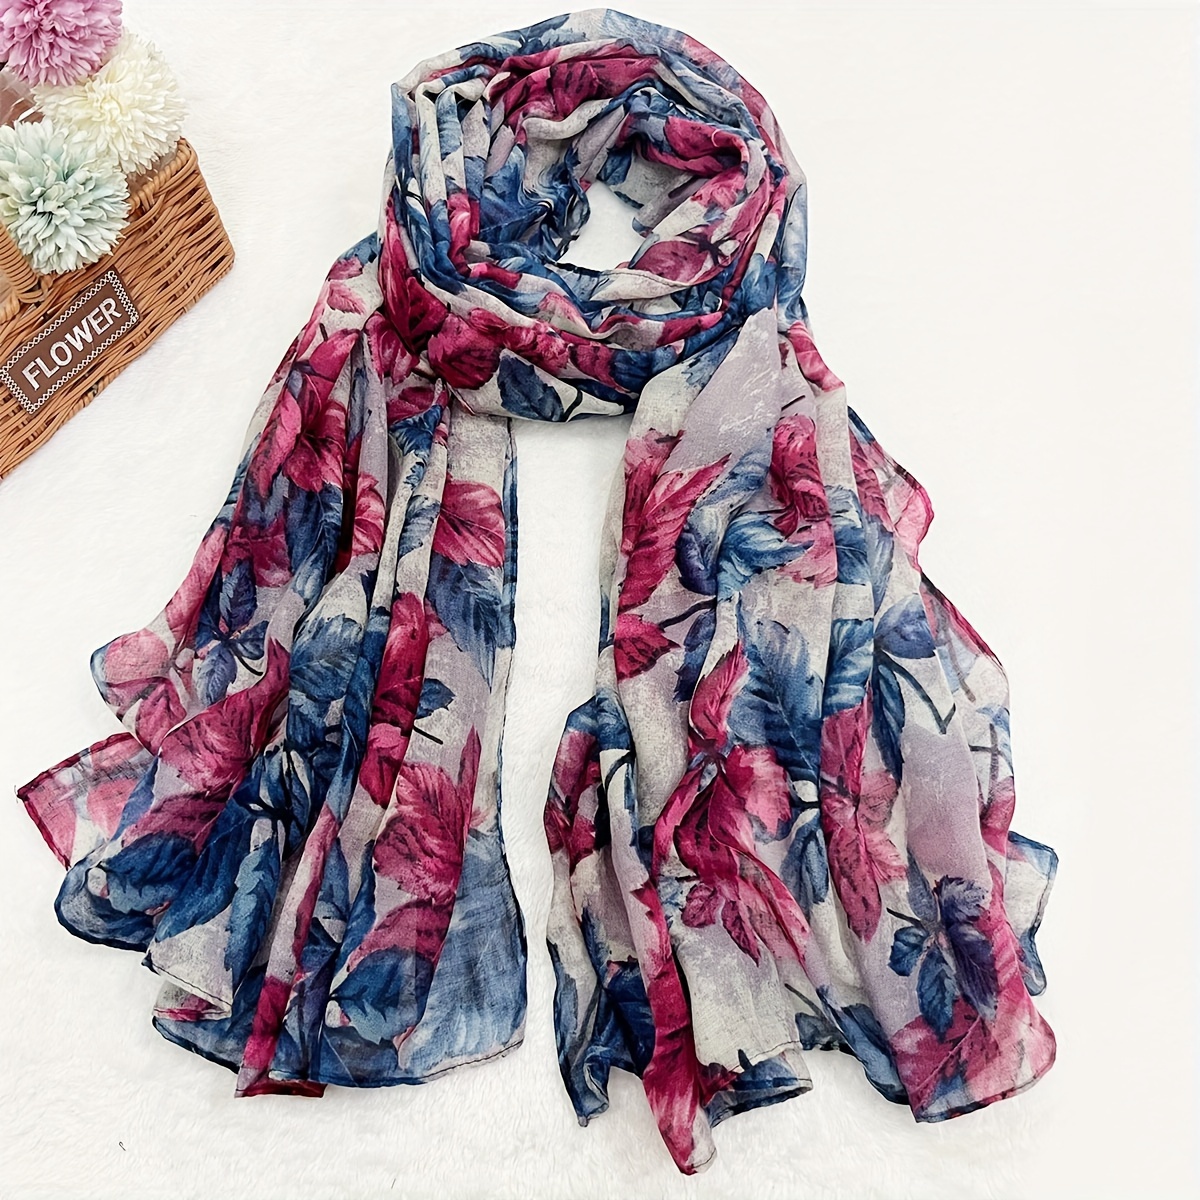 

Vintage Maple Printed Scarf Thin Breathable Shawl Summer Windproof Sunscreen Cotton Head Wrap For Women